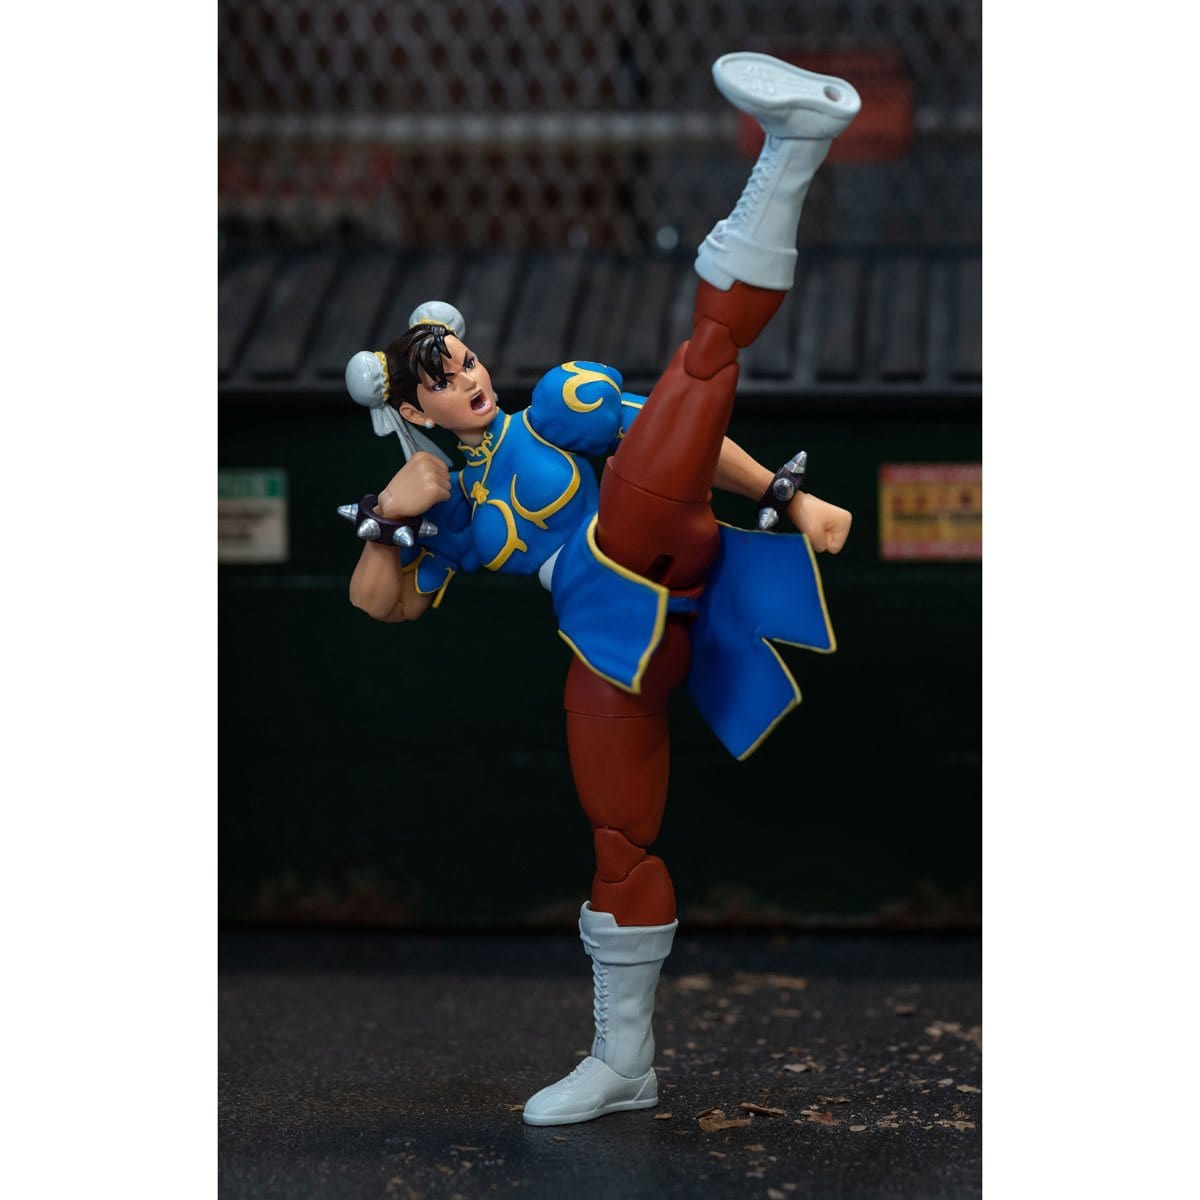 Ultra-Street-Fighter-II-Chun-Li6-Inch-Scale-Action-Figure-toys-pose-collectible-high-kick